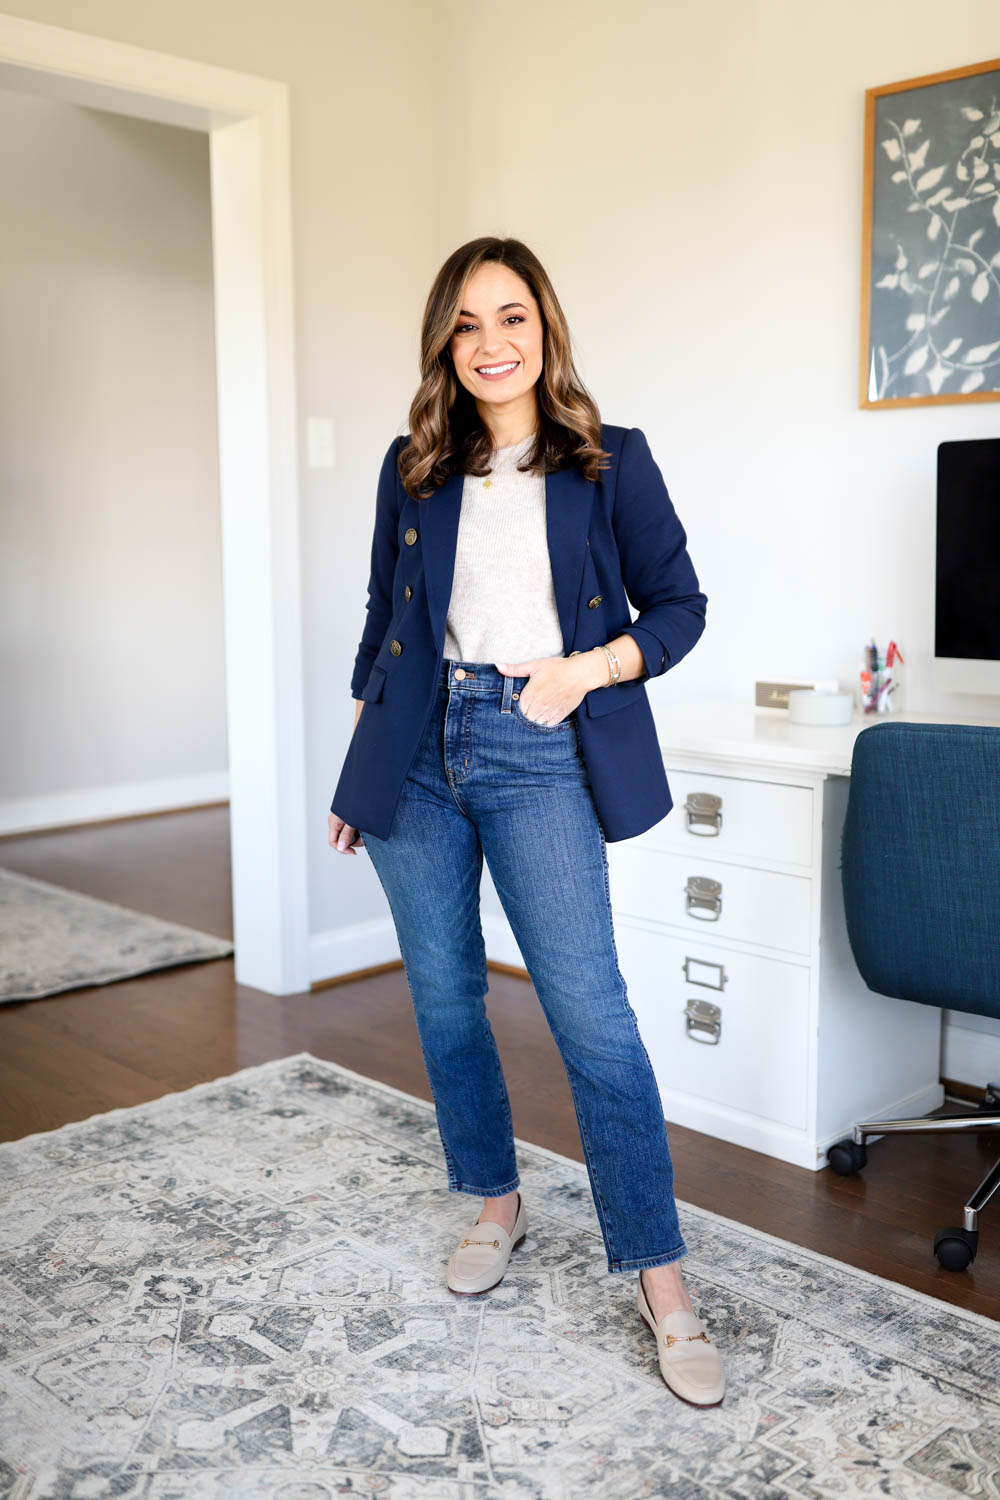 Smart casual outfit via pumps and push-ups blog | petite style blog | petite fashion | outfits for work | navy blazer outfits 